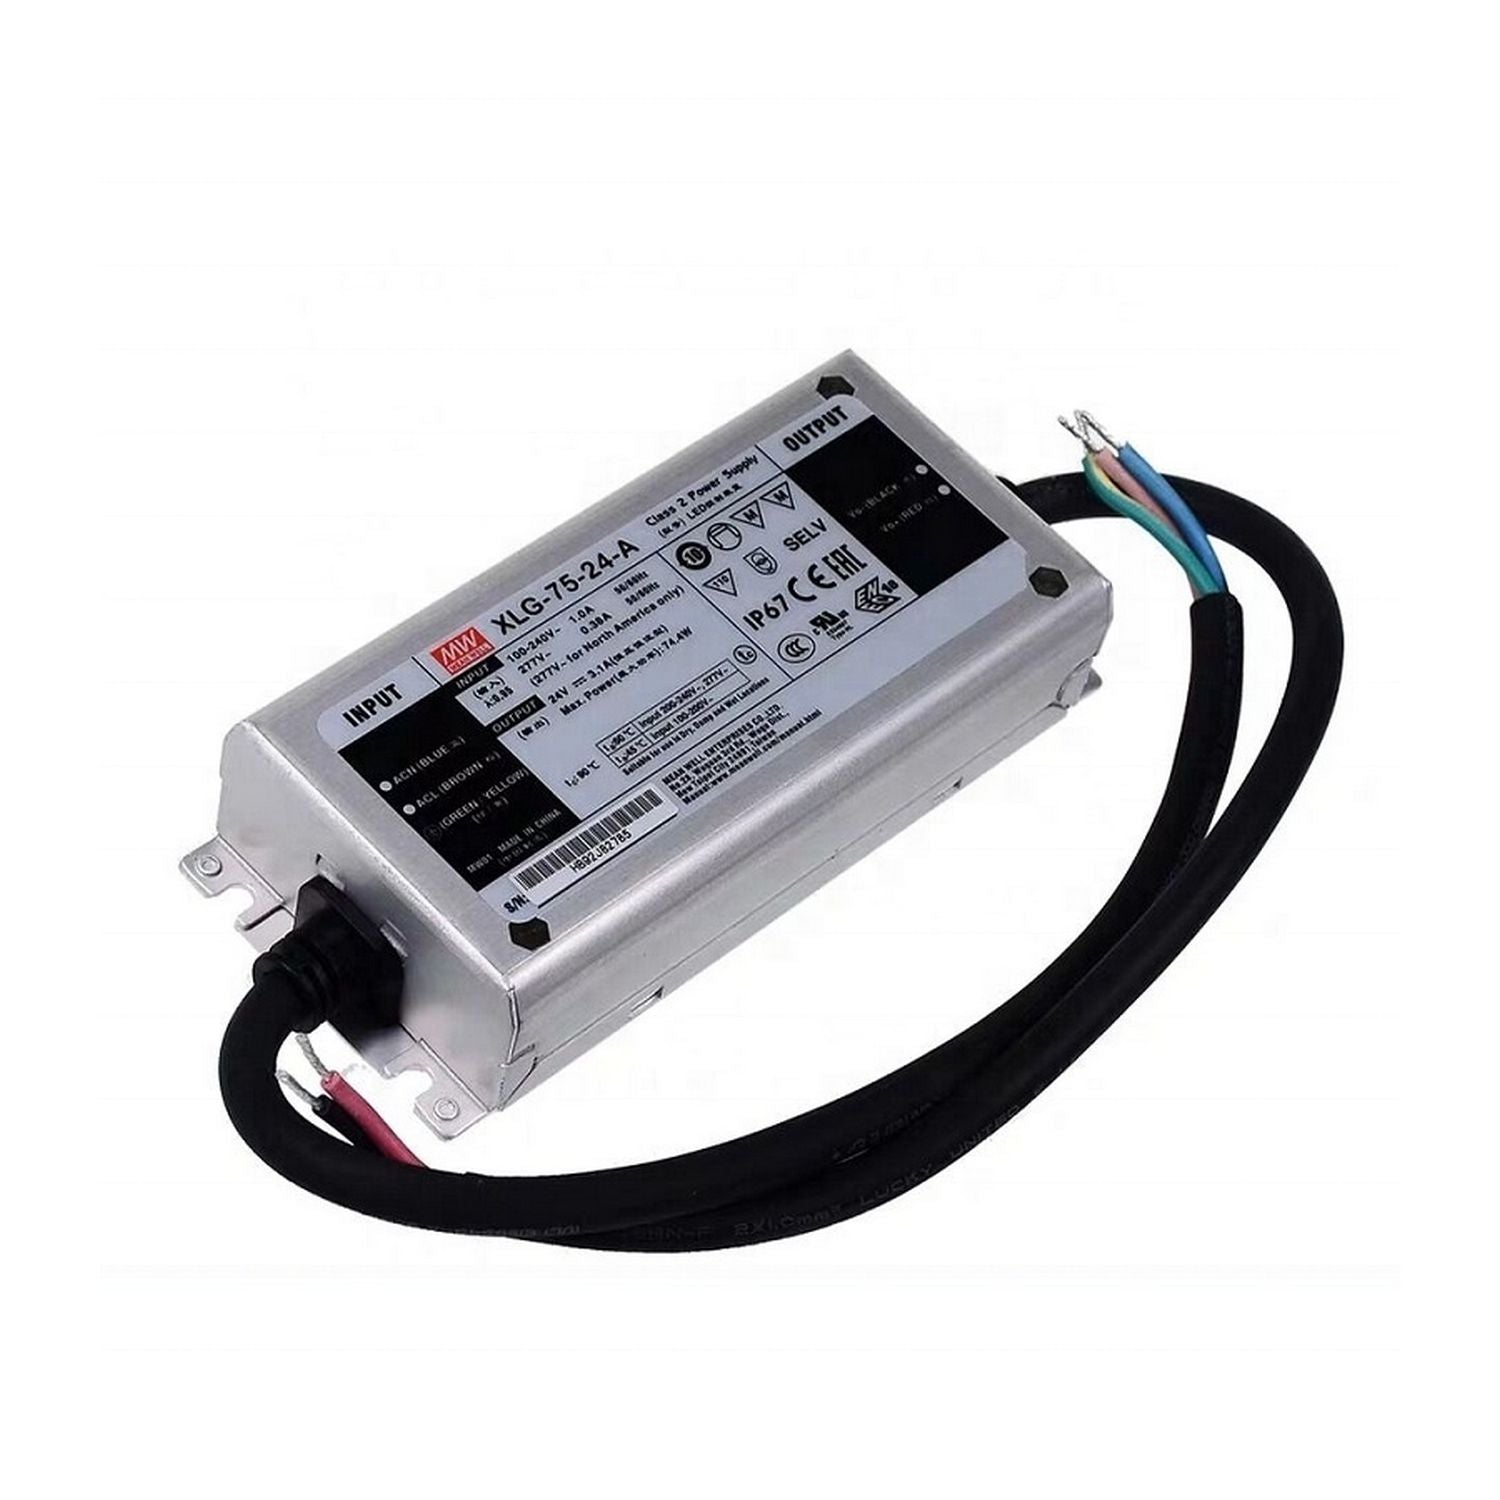 Shop Generic 50W LED Driver Waterproof IP67 Power Supply High